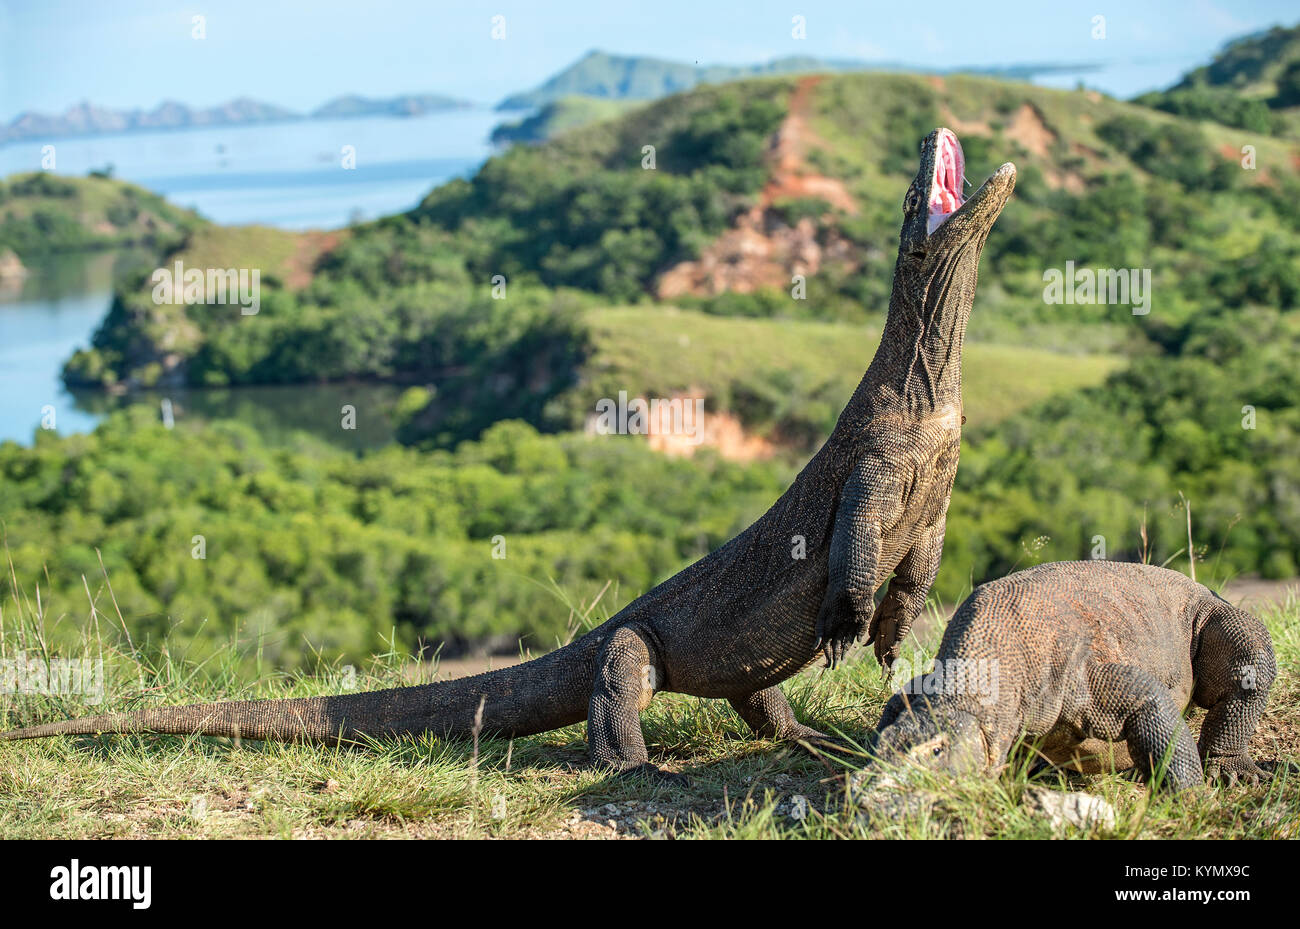 Komodo dragon (Varanus komodoensis) stands on its hind legs and open mouth. It is the biggest living lizard in the world. On island Rinca. Indonesia Stock Photo